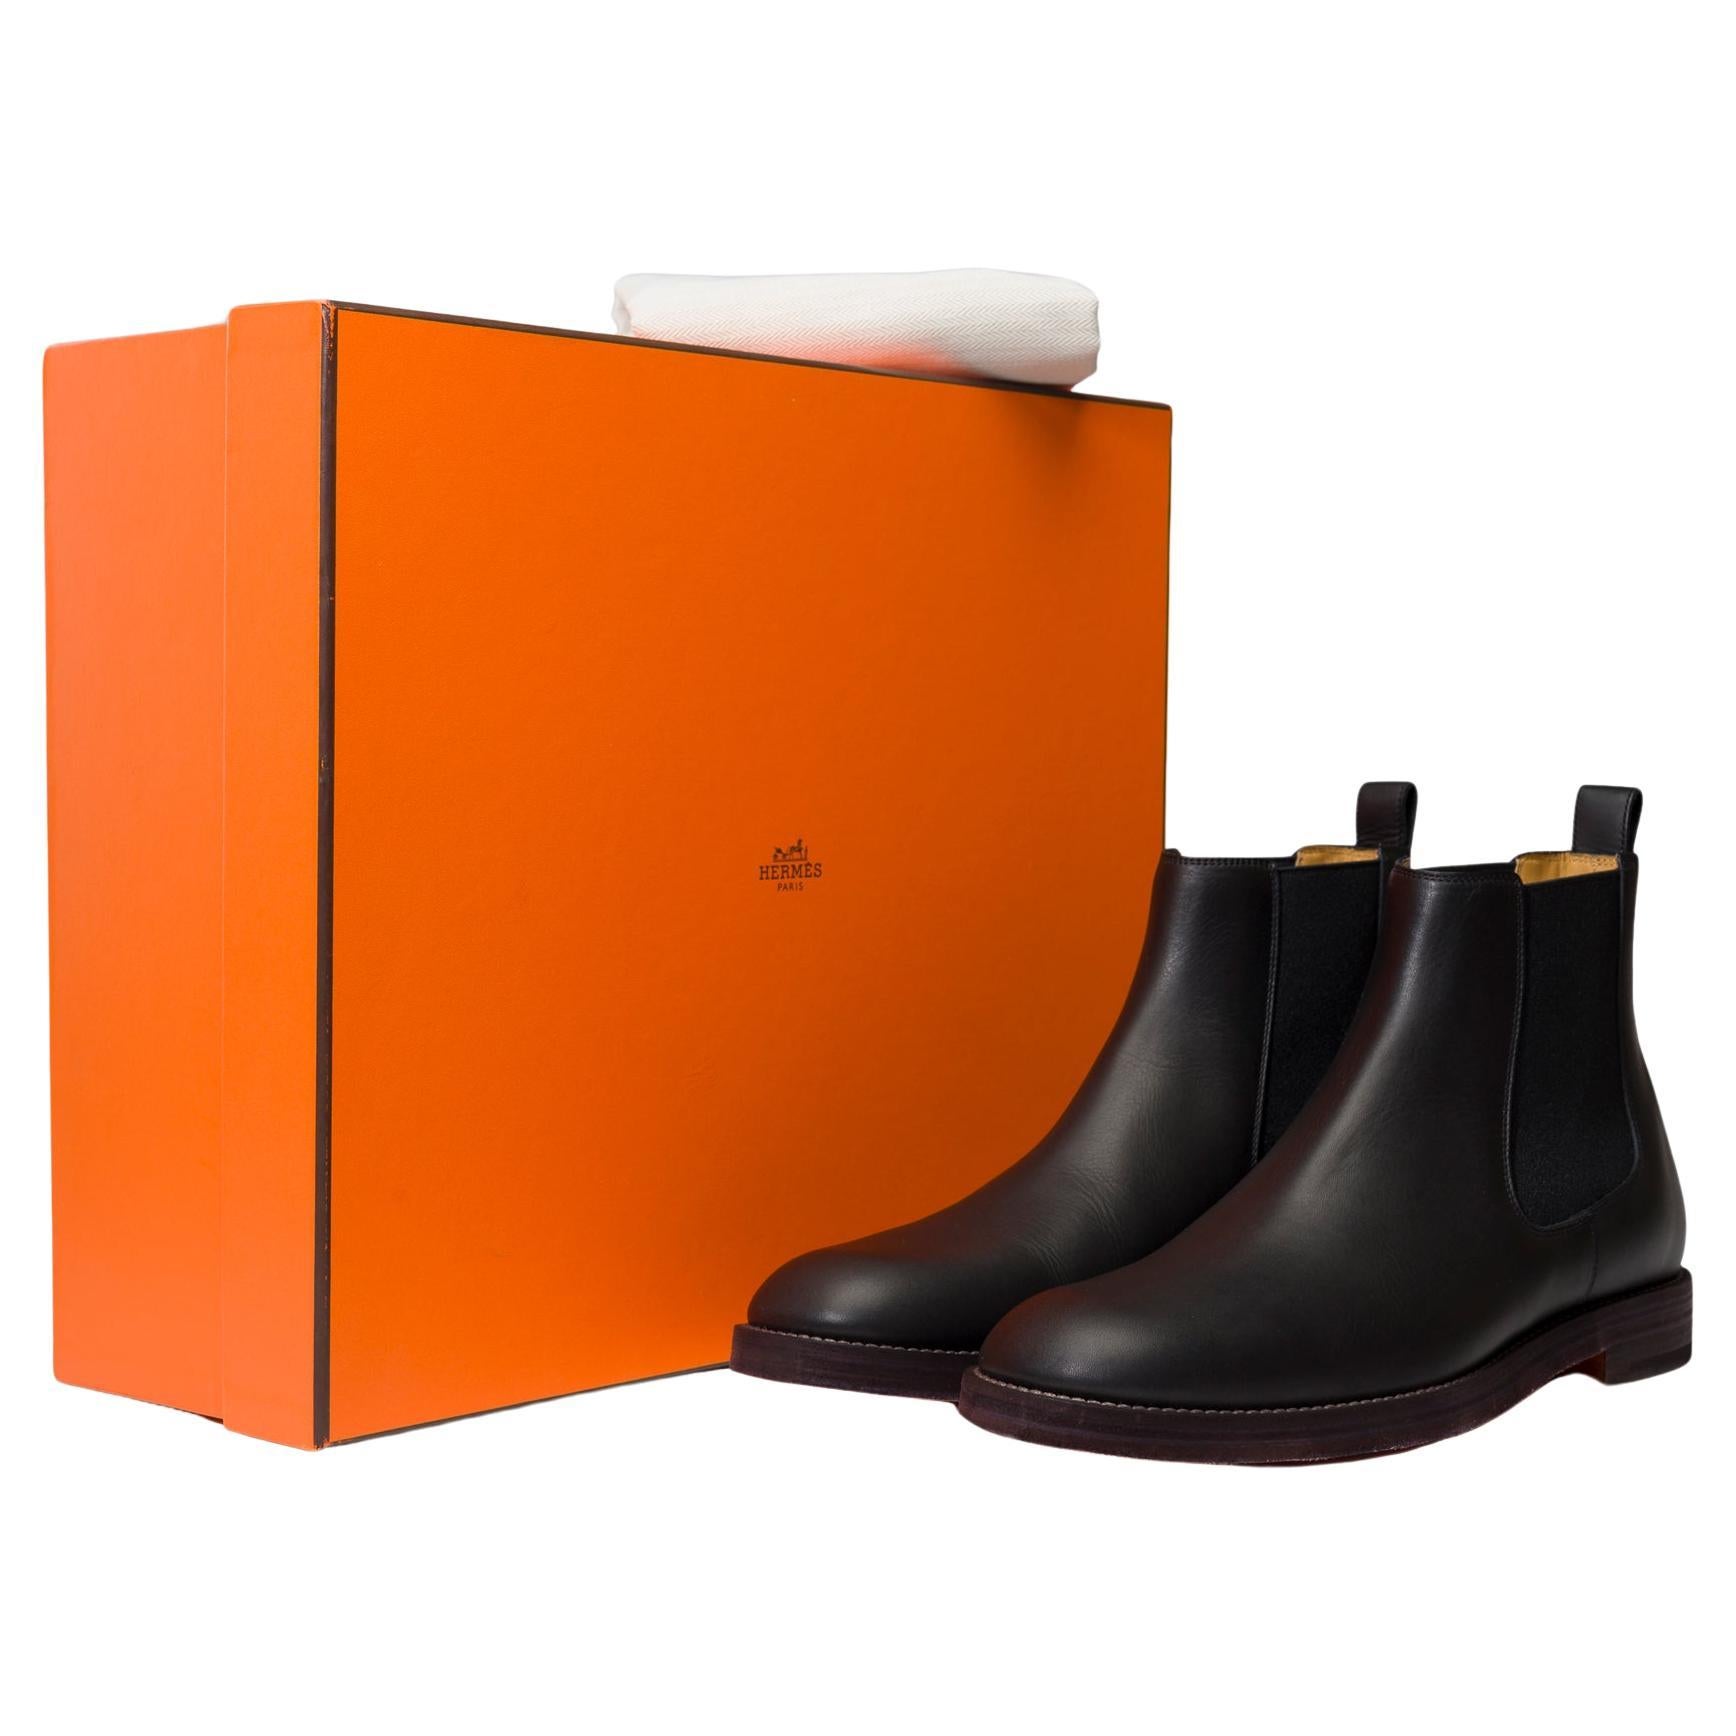 New - Hermès boots for men in black calf leather, Size 44 For Sale